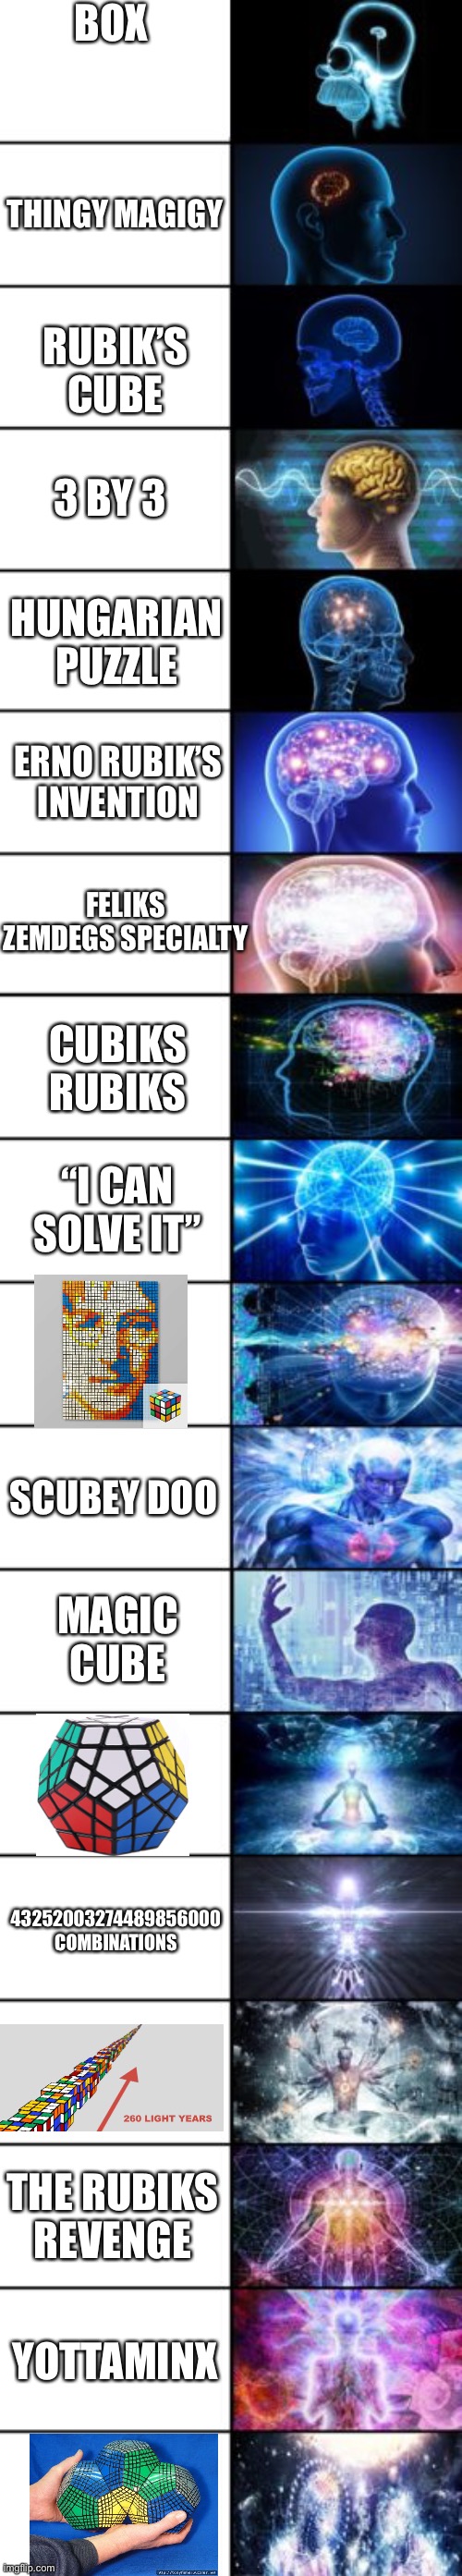 What to name your Rubik’s cube | BOX; THINGY MAGIGY; RUBIK’S CUBE; 3 BY 3; HUNGARIAN PUZZLE; ERNO RUBIK’S INVENTION; FELIKS ZEMDEGS SPECIALTY; CUBIKS RUBIKS; “I CAN SOLVE IT”; SCUBEY DOO; MAGIC CUBE; 43252003274489856000 COMBINATIONS; THE RUBIKS REVENGE; YOTTAMINX | image tagged in expanding brain longest version,rubik cube,expanding brain,brain,memes,oh wow are you actually reading these tags | made w/ Imgflip meme maker